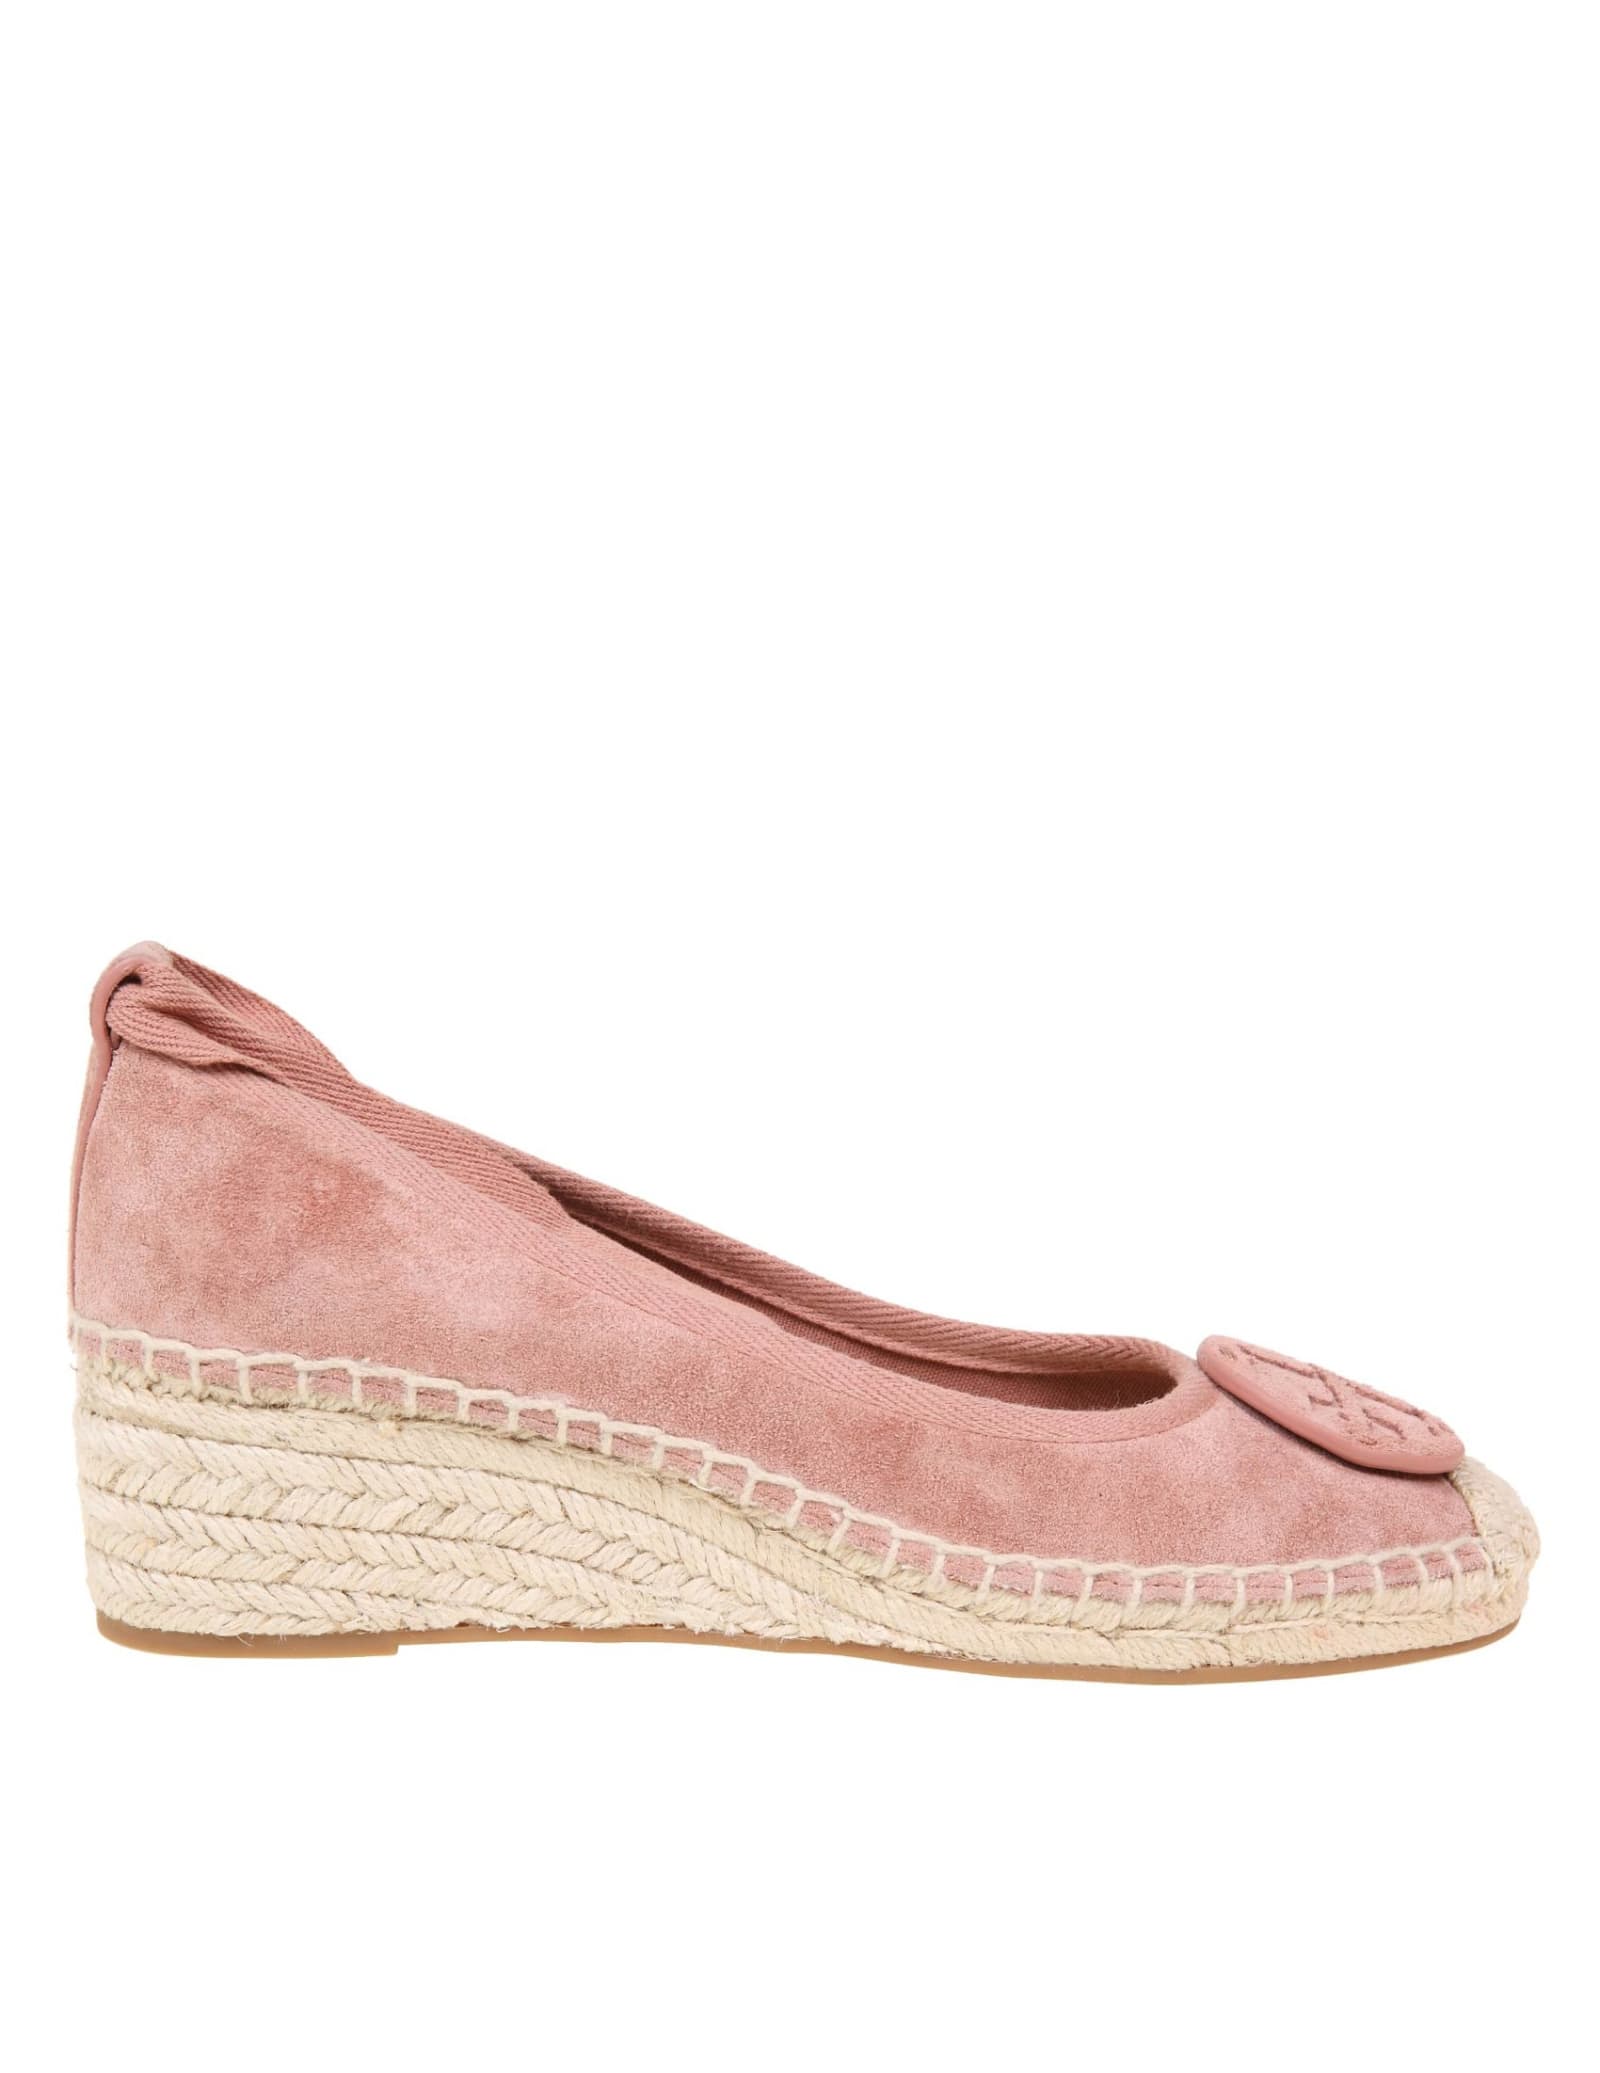 Buy Tory Burch Espadrille Minnie In Mauve Color Suede online, shop Tory Burch shoes with free shipping